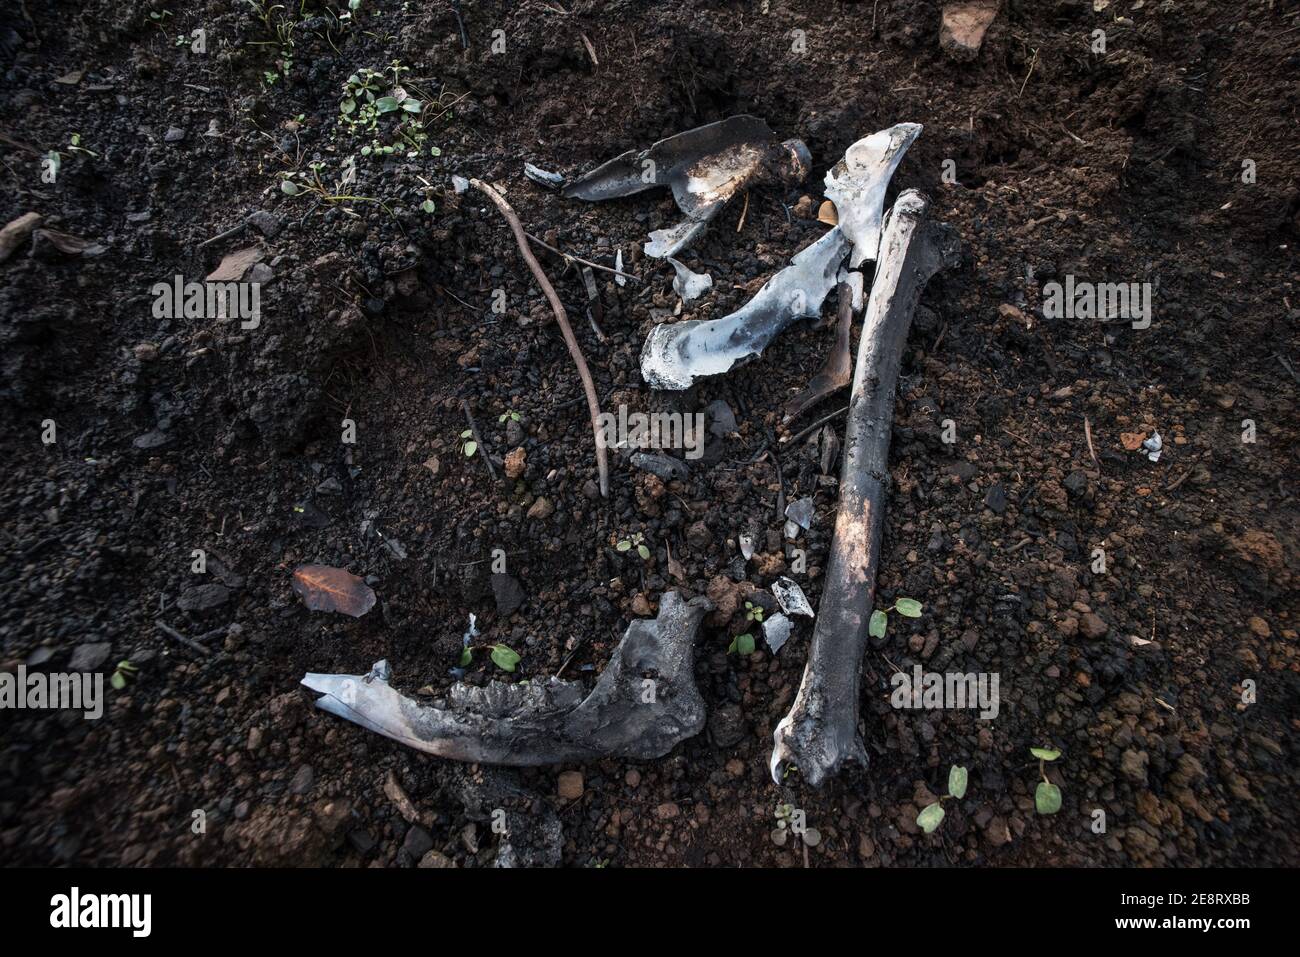 Charred bones are all that remain of a mule deer that must have gotten caught in the California wildfires. Stock Photo